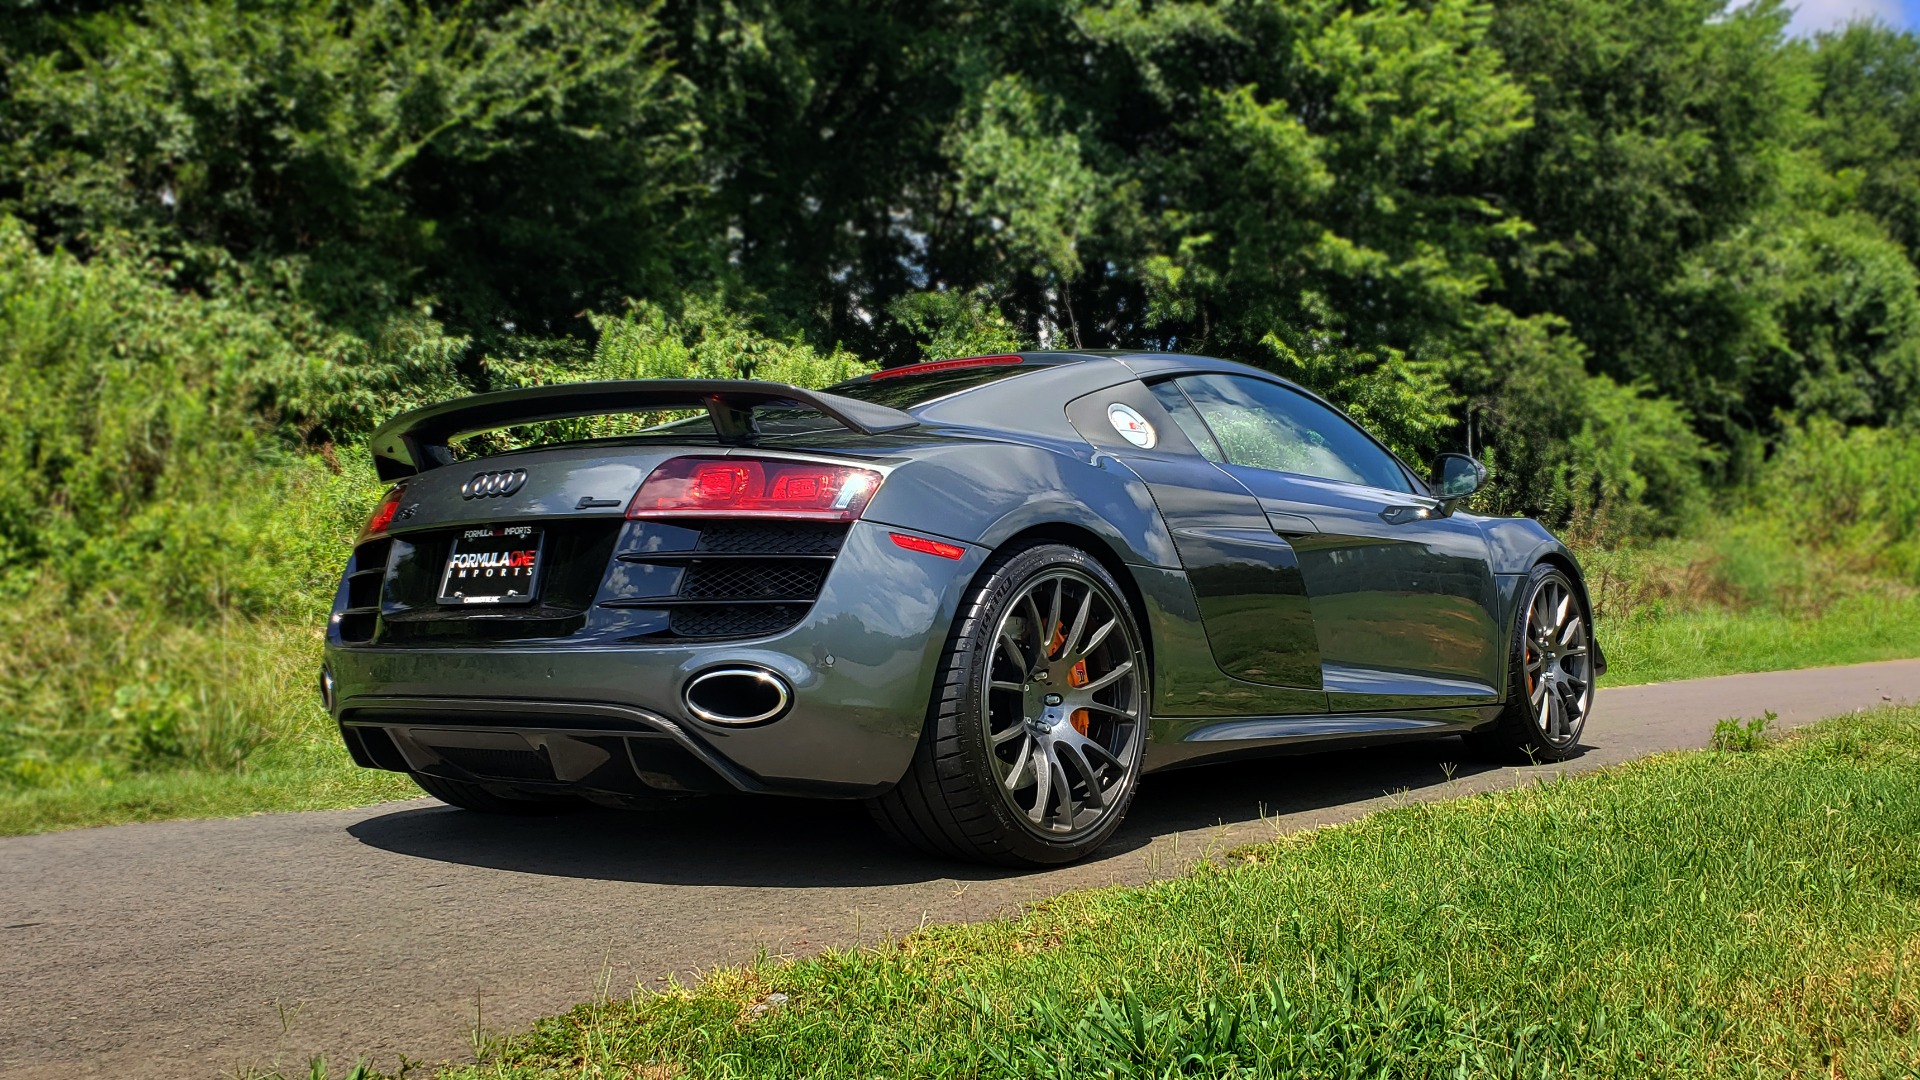 Used 2010 Audi R8 5.2L V10 SUPERCHARGED / AWD / COUPE / CUSTOM TUNED for sale Sold at Formula Imports in Charlotte NC 28227 13